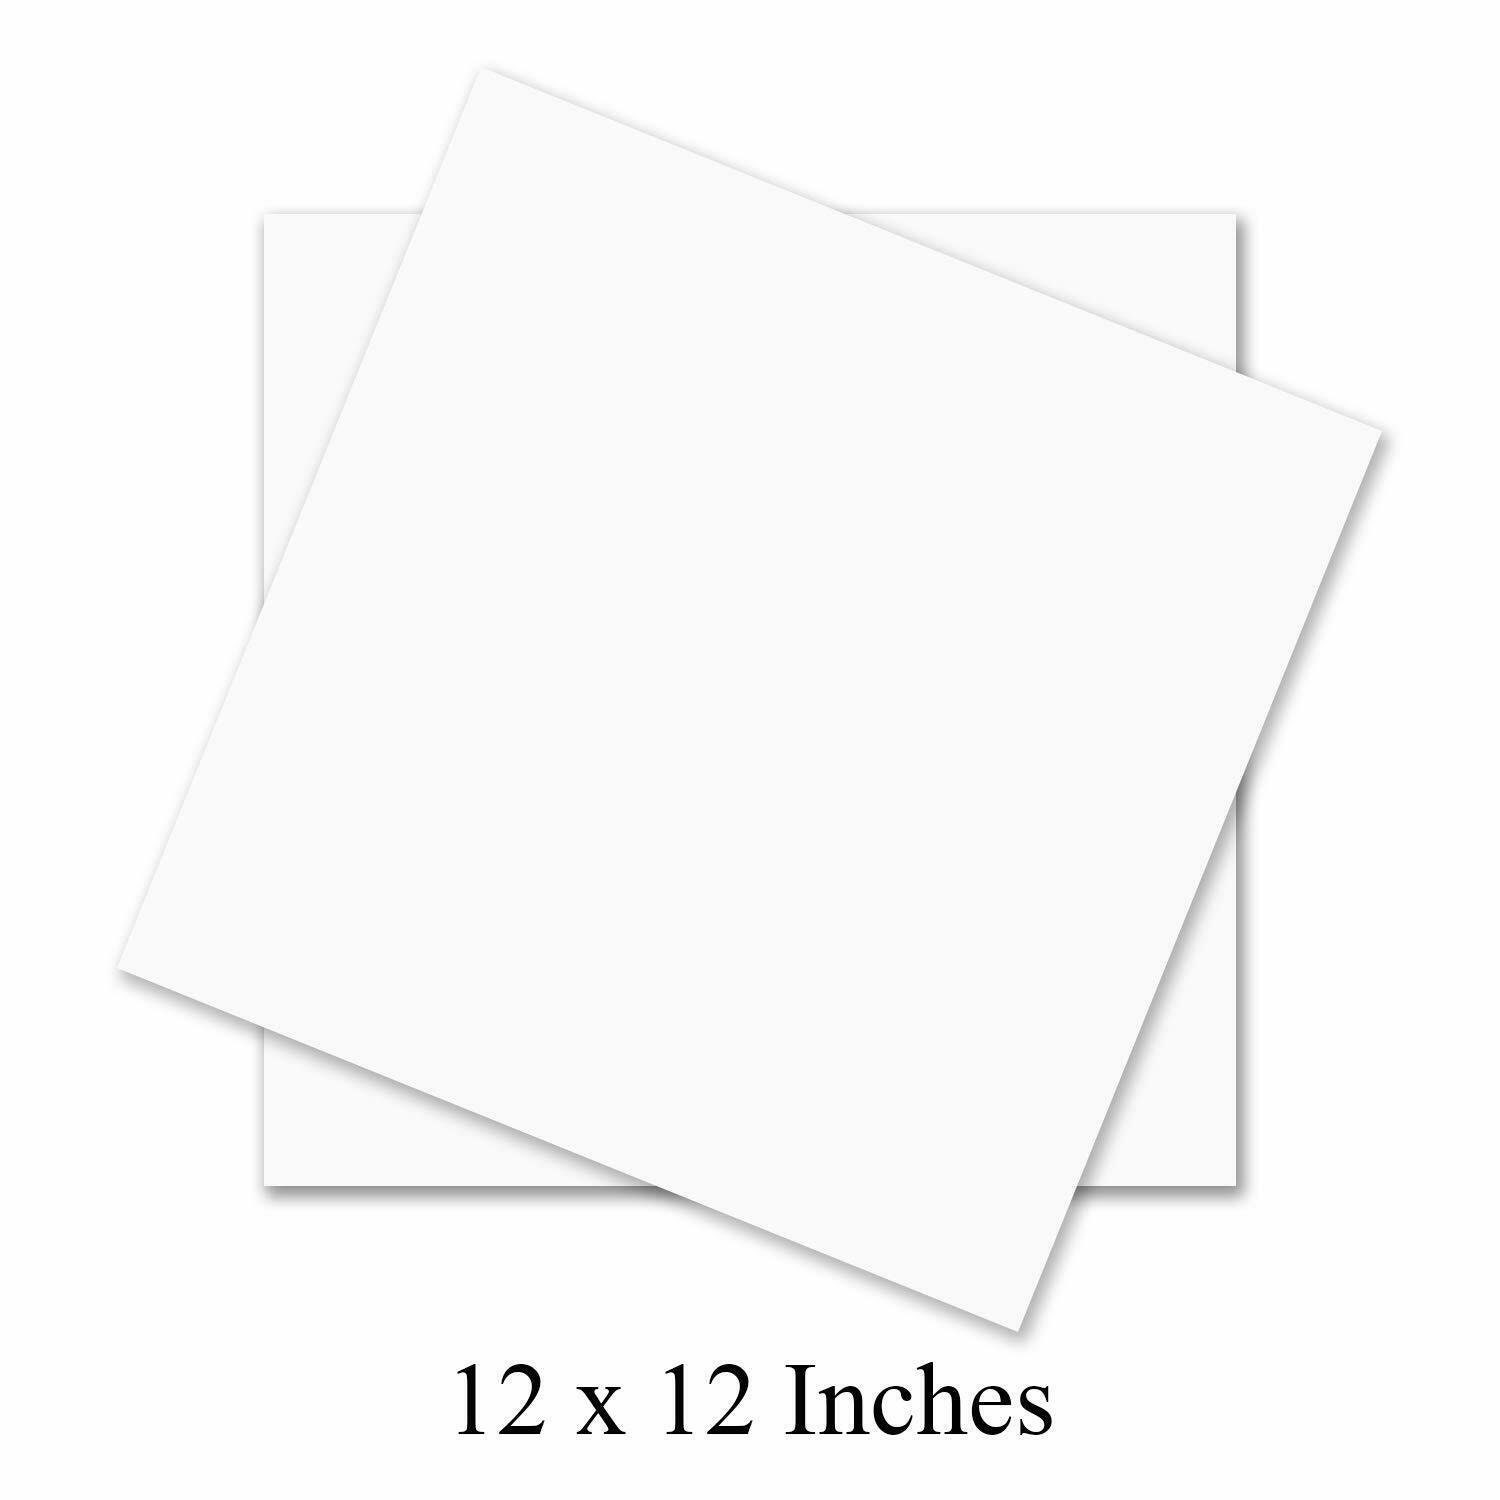 12 x 12 Square Cardstock | 80lb Cover White Thick Card Stock Paper -  Smooth Finish | For Scrapbooking, Arts and Crafts, Wedding Invitations